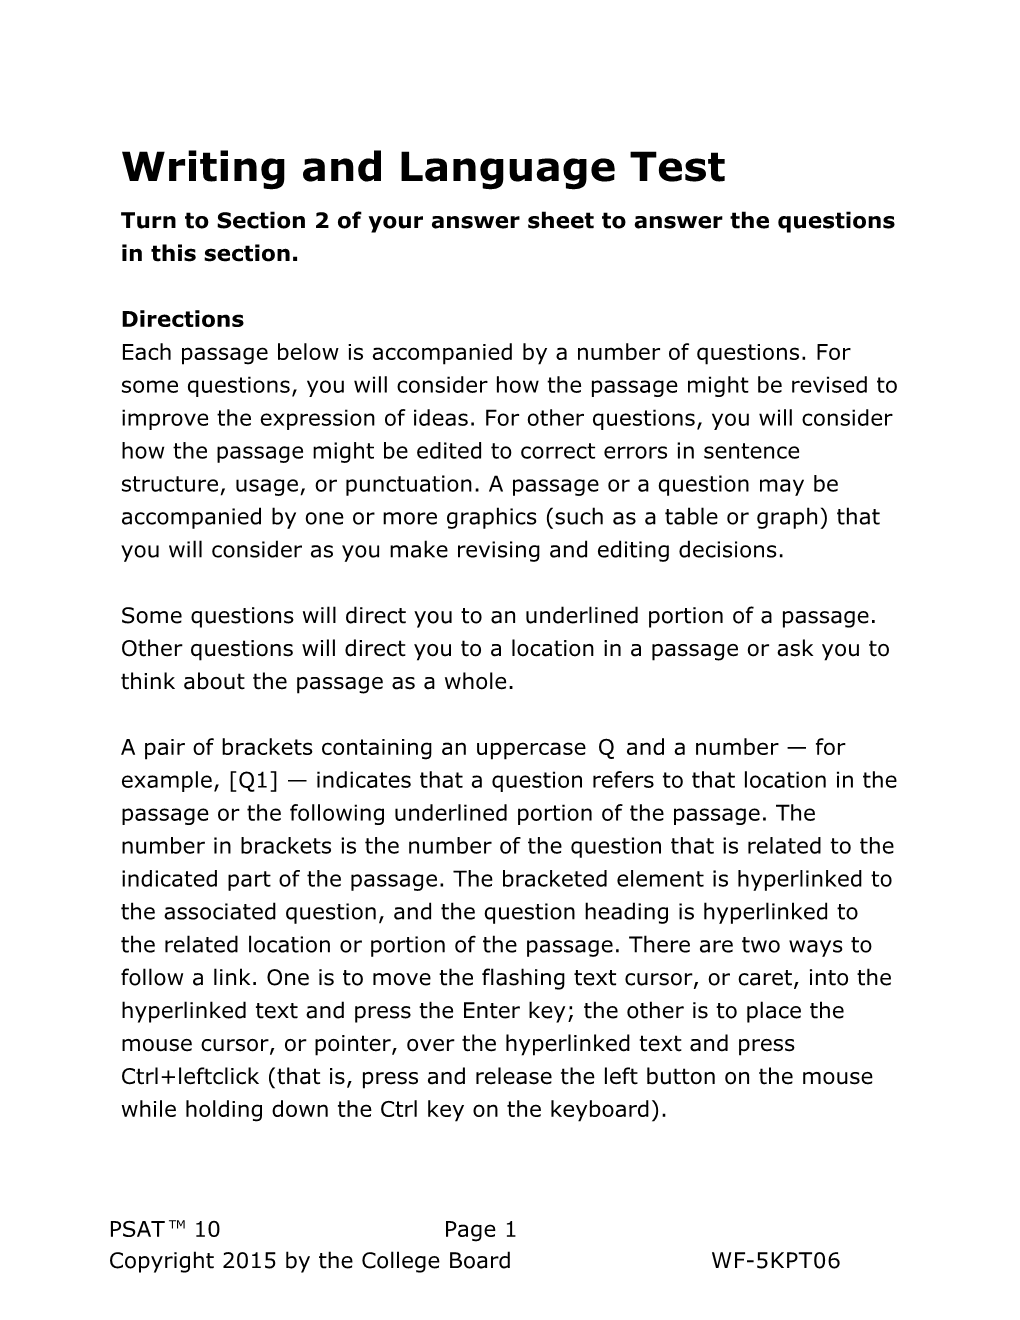 PSAT 10 Practice Test 1 for Assistive Technology Writing and Language Test SAT Suite Of